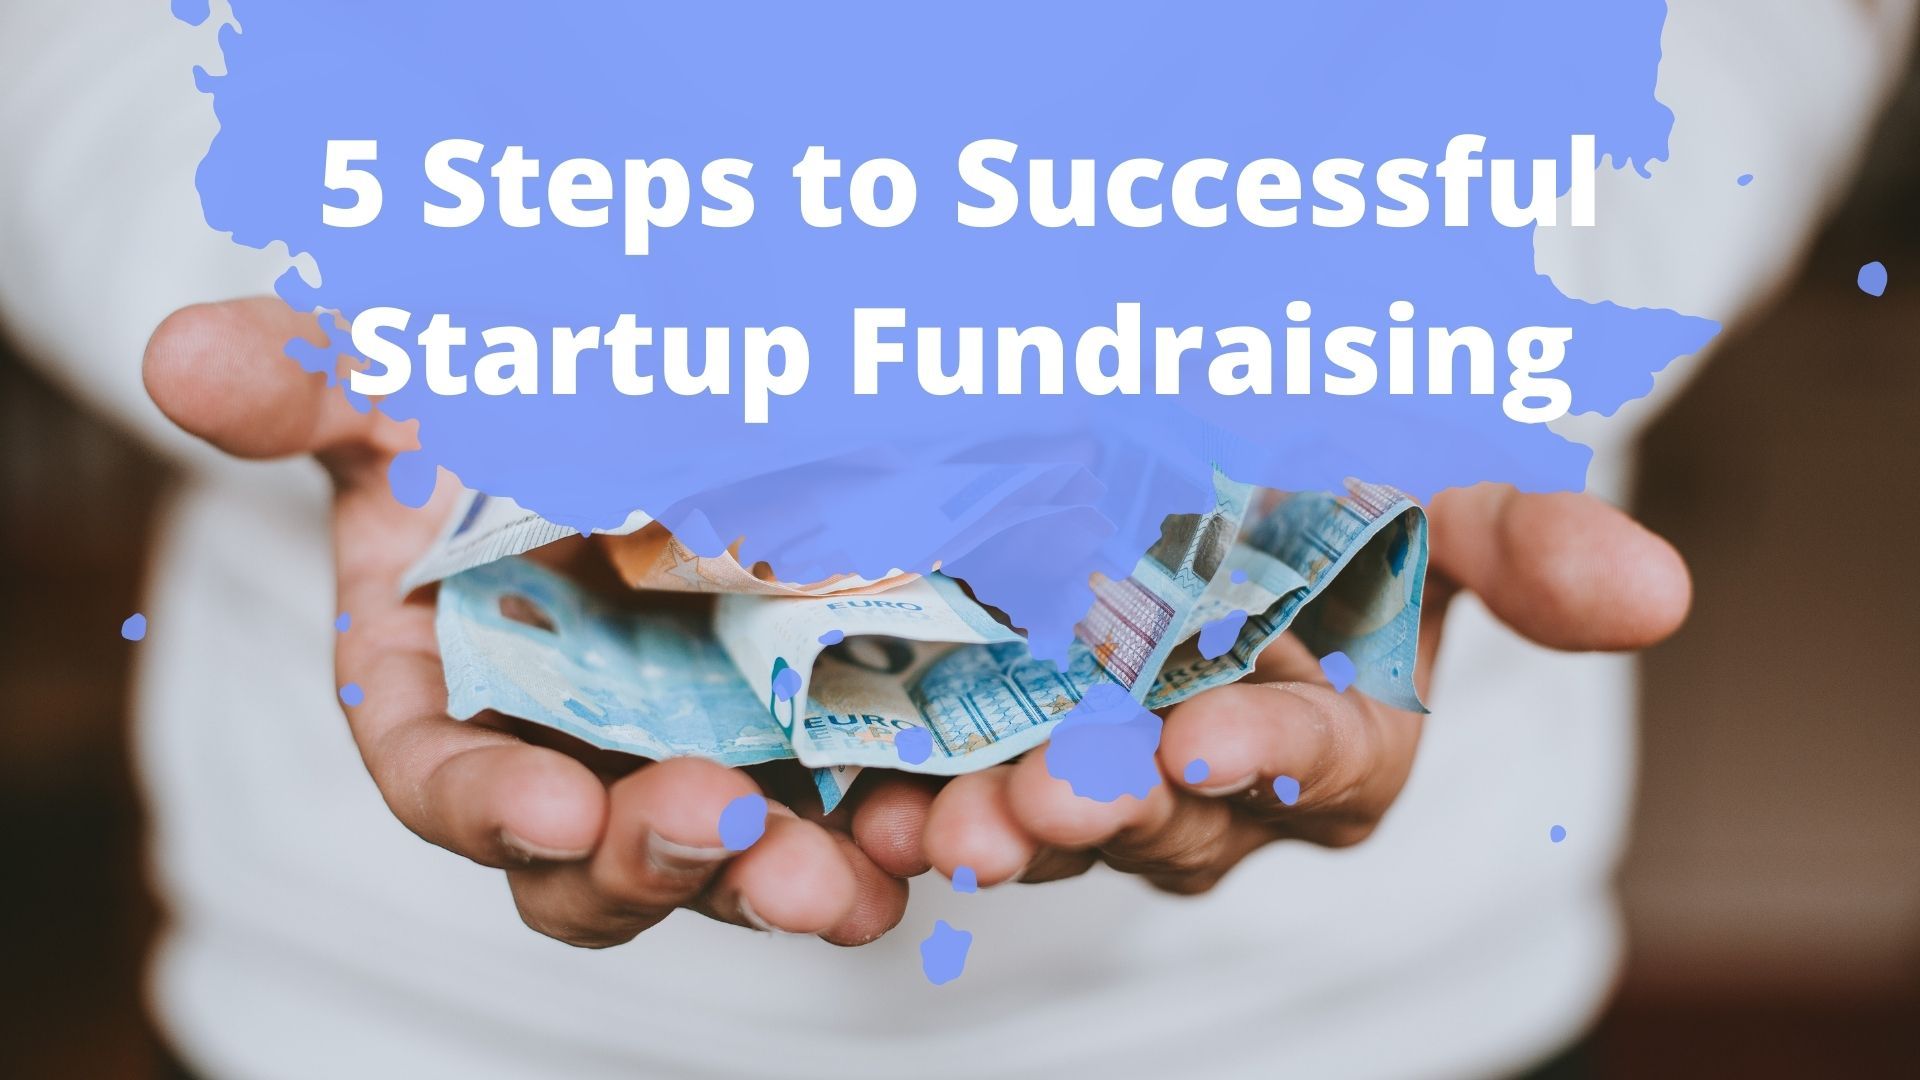 5 Steps to Successful Startup Fundraising